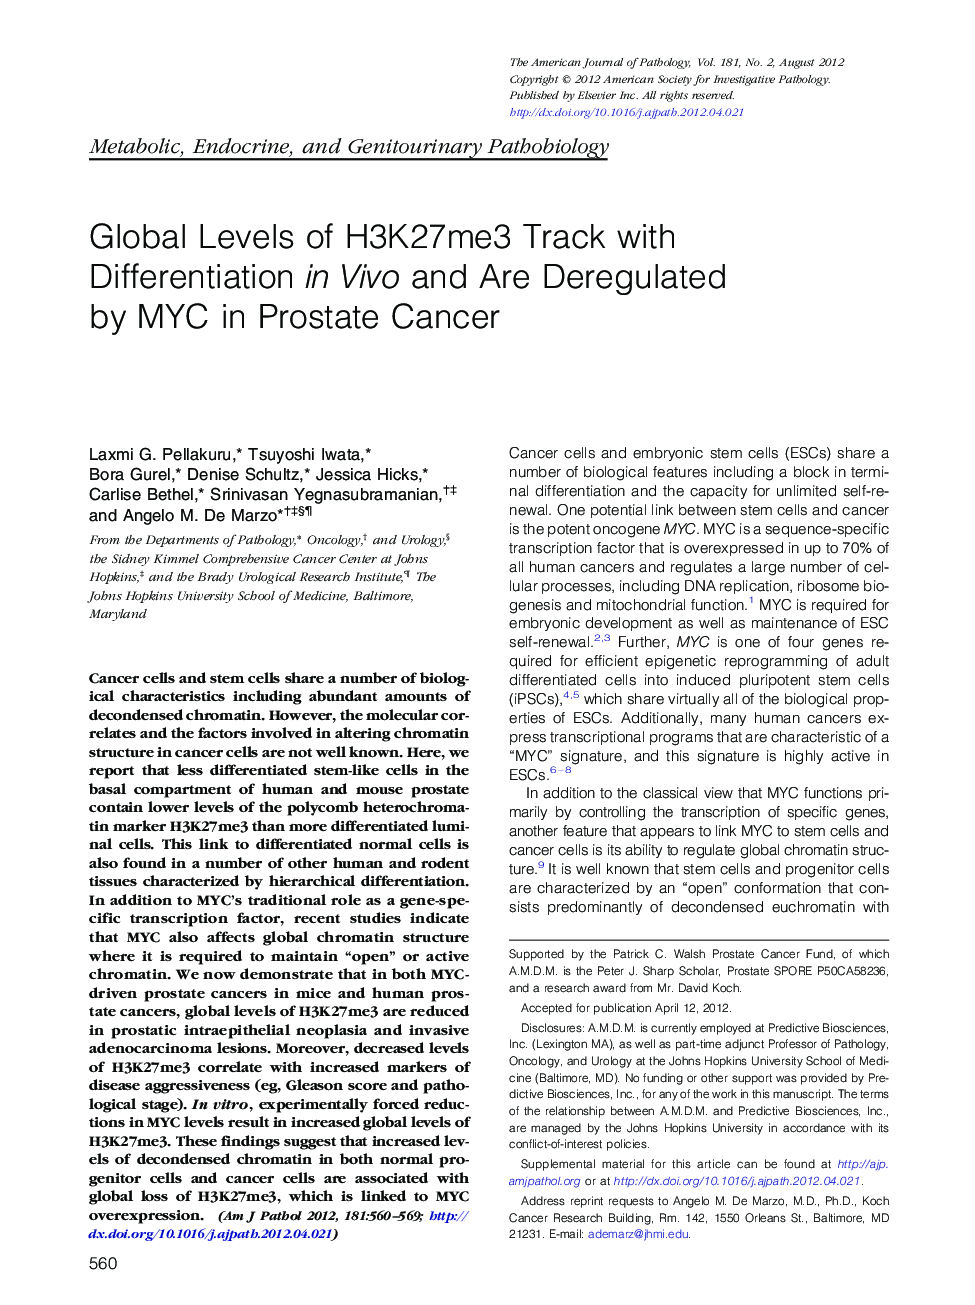 Global Levels of H3K27me3 Track with Differentiation in Vivo and Are Deregulated by MYC in Prostate Cancer